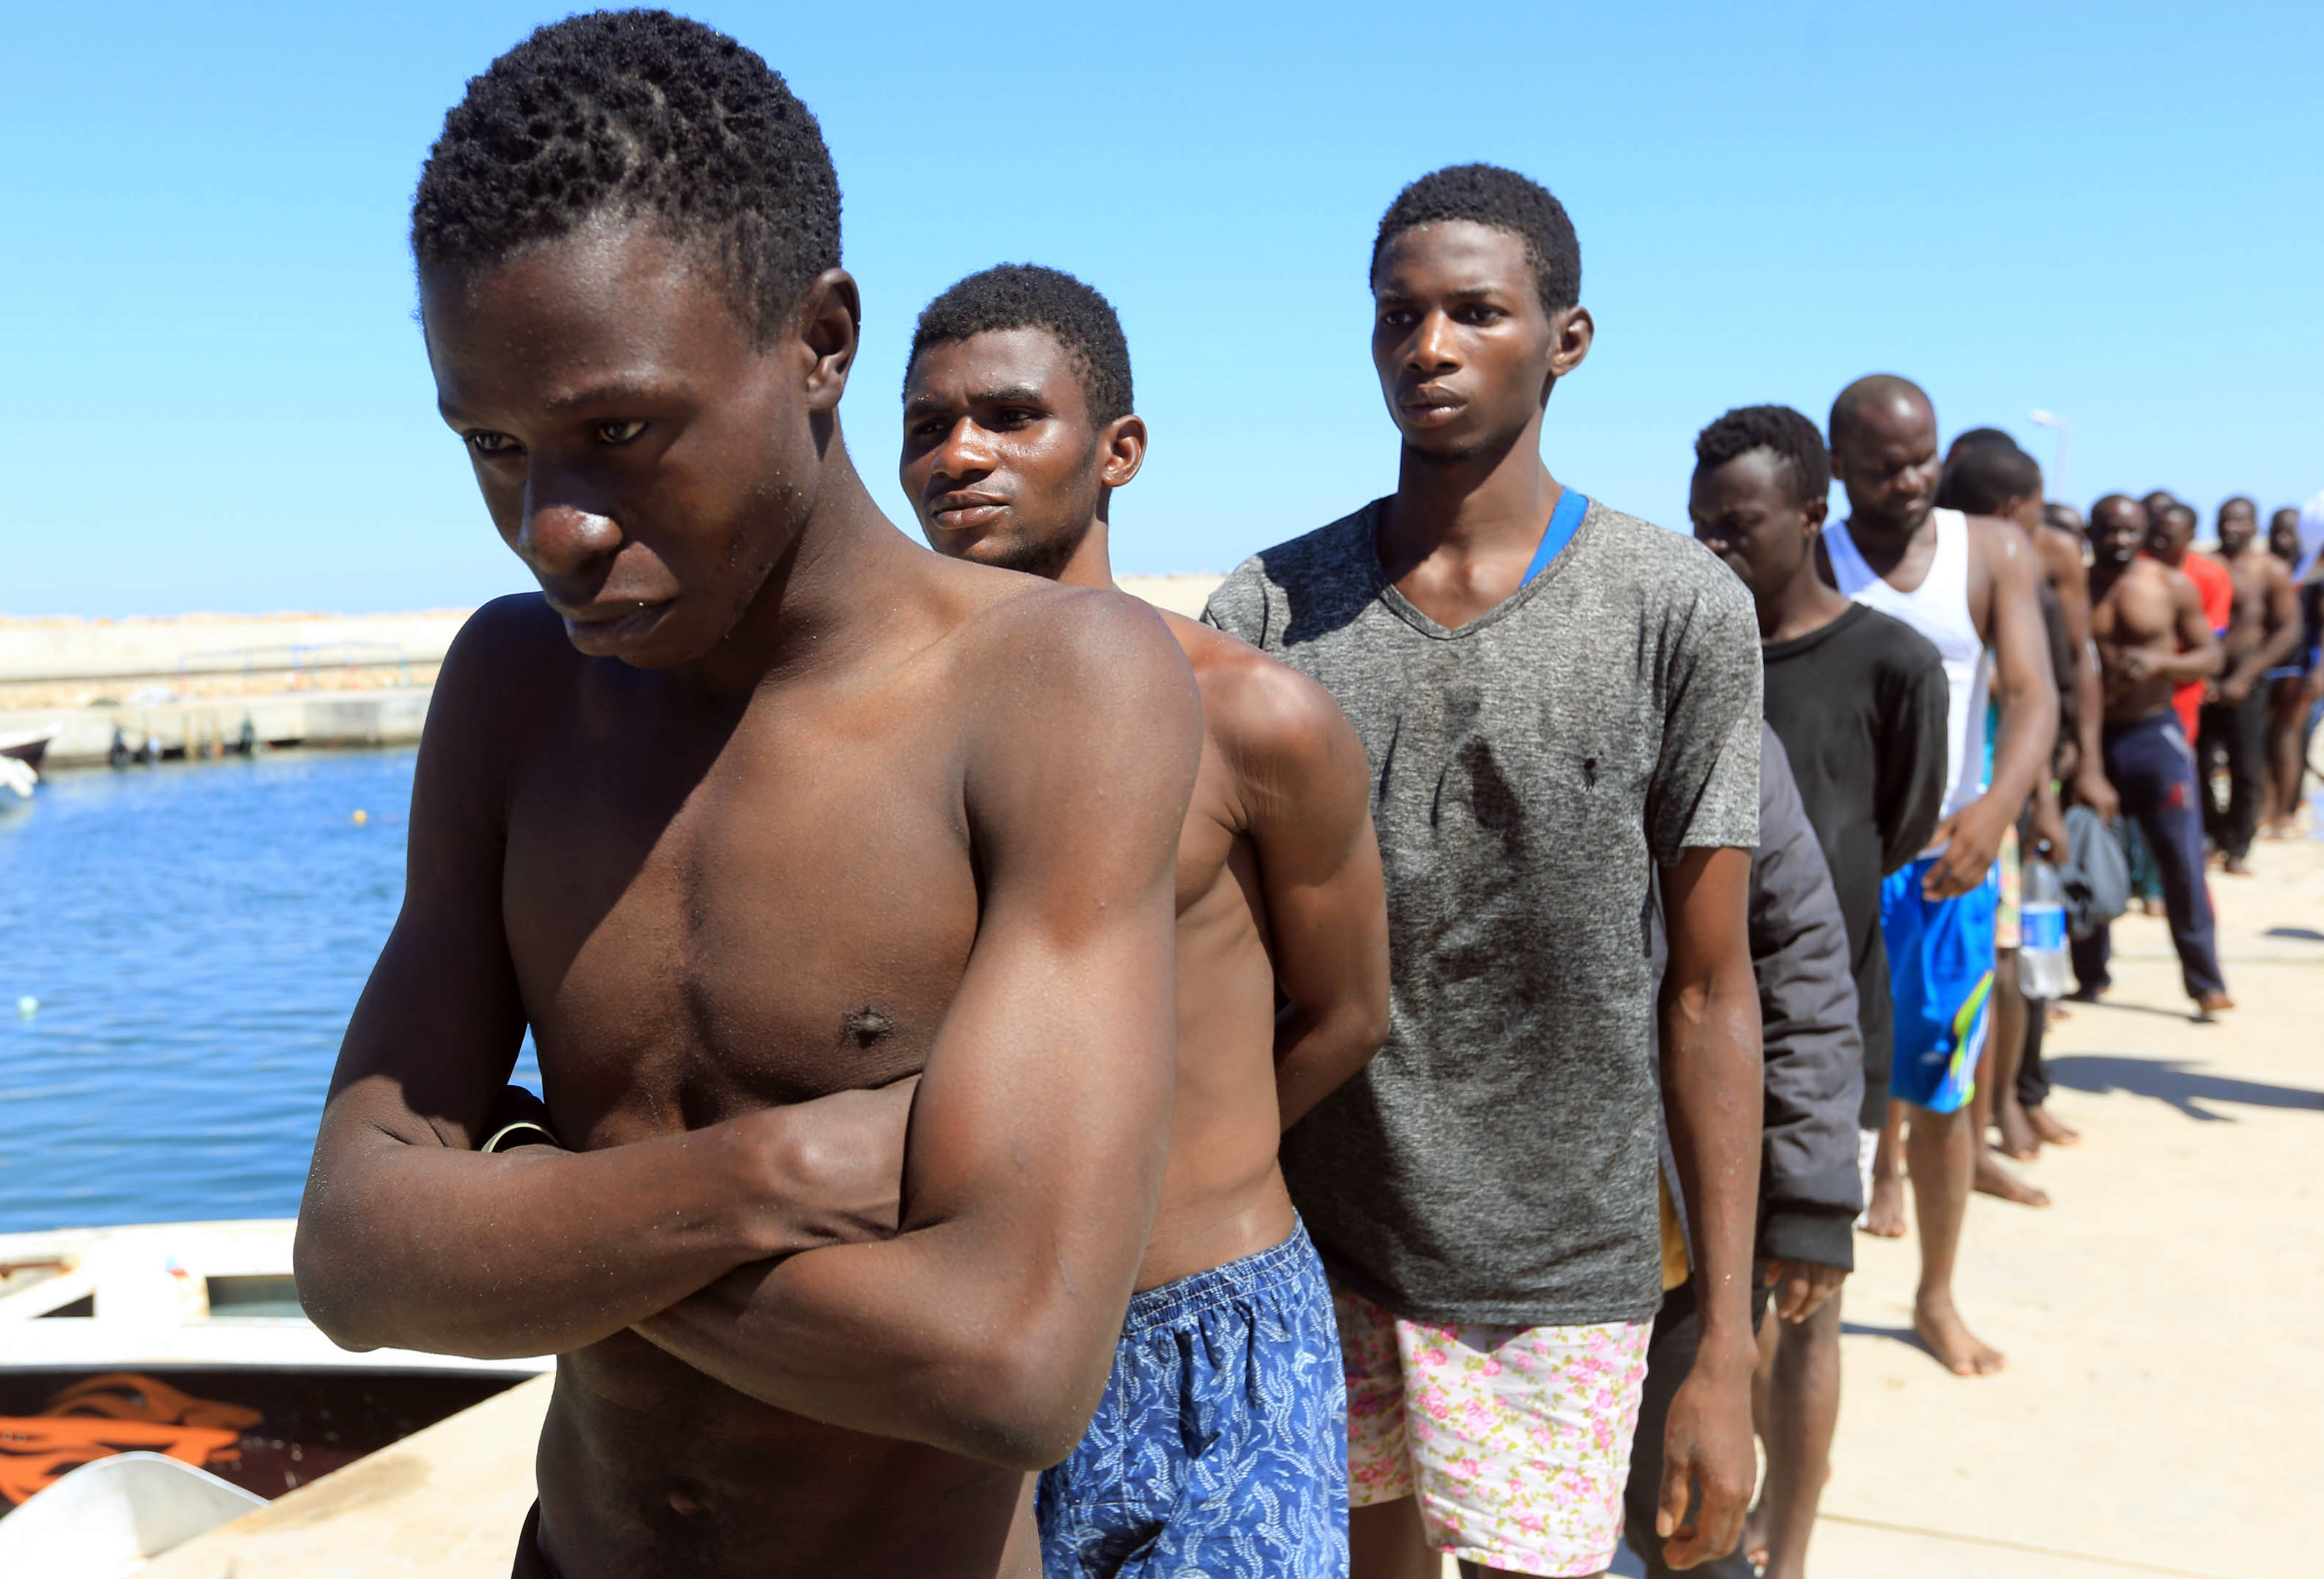 Libyan Slave Trade: Here's What You Need to Know | Time